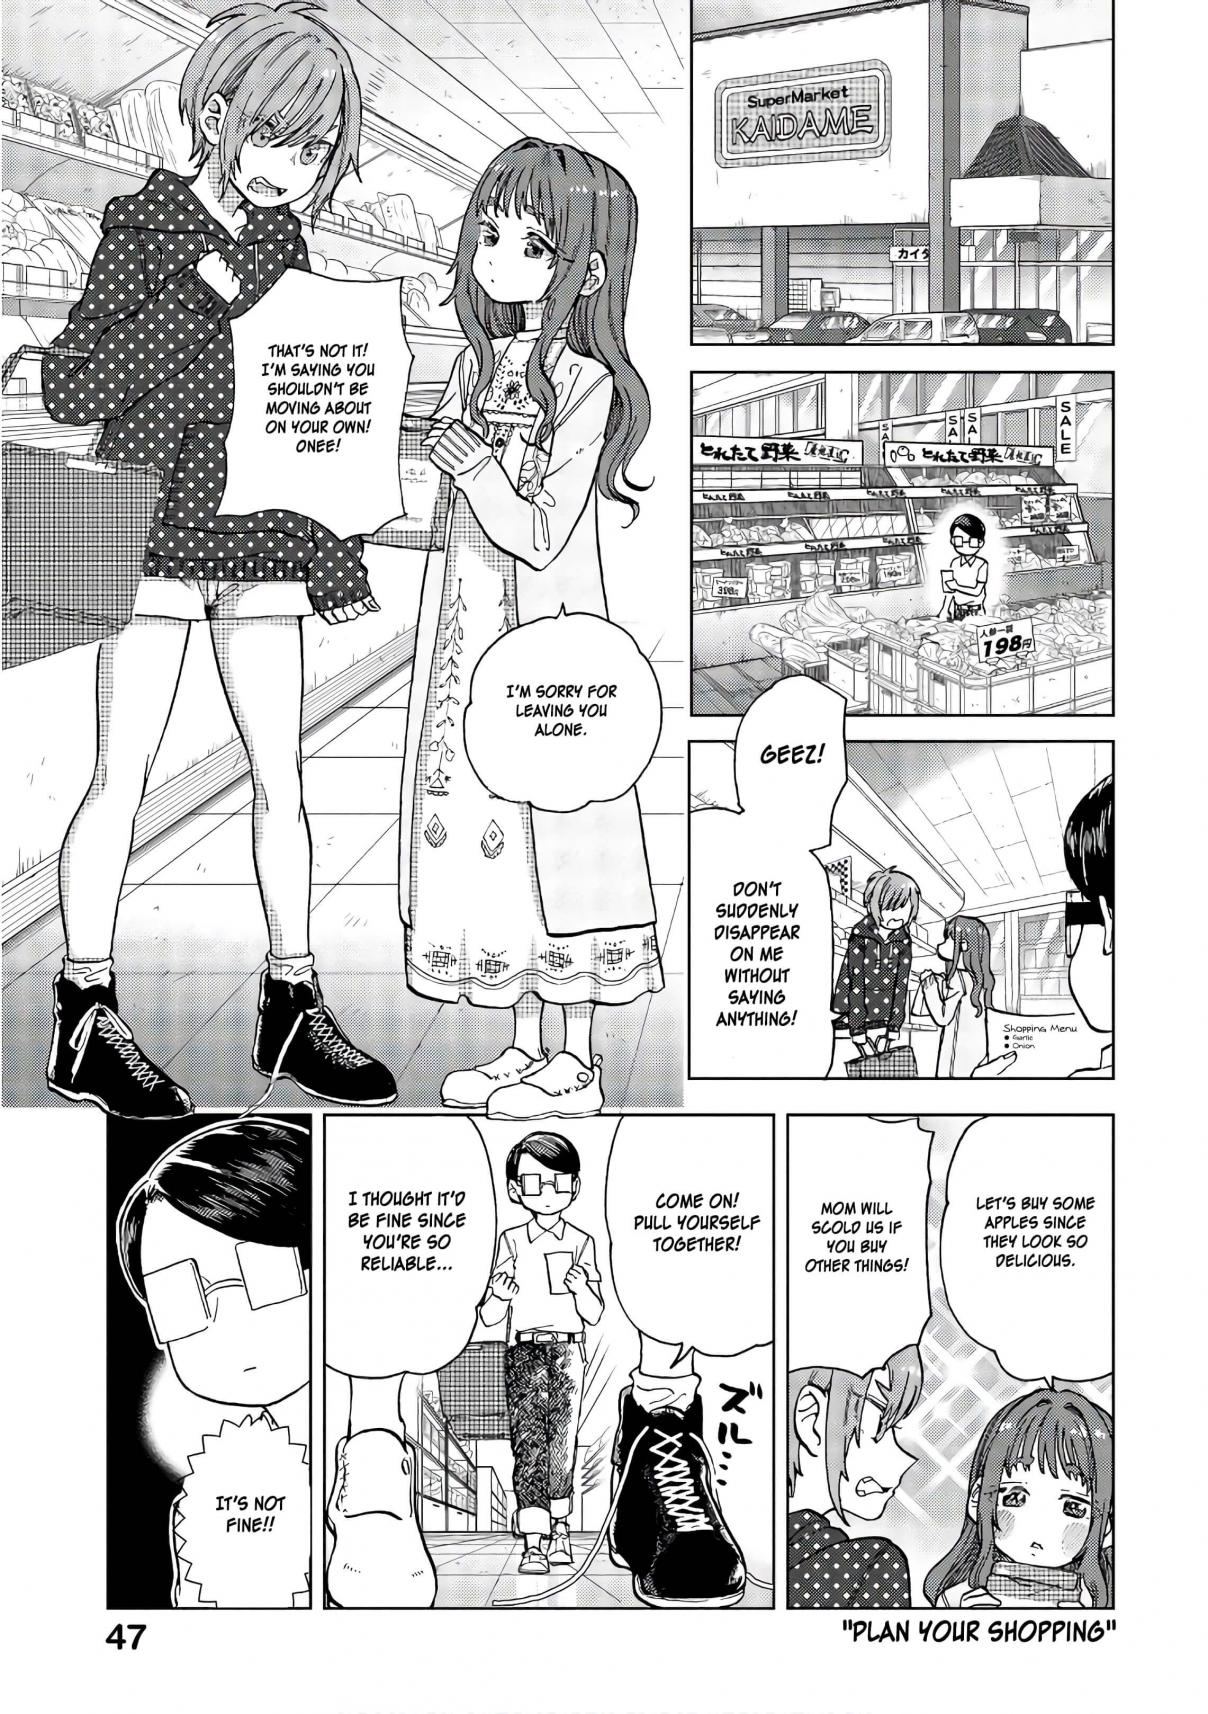 Eguchi kun Doesn't Miss a Thing Vol. 3 Ch. 15 Eguchi And Single Action